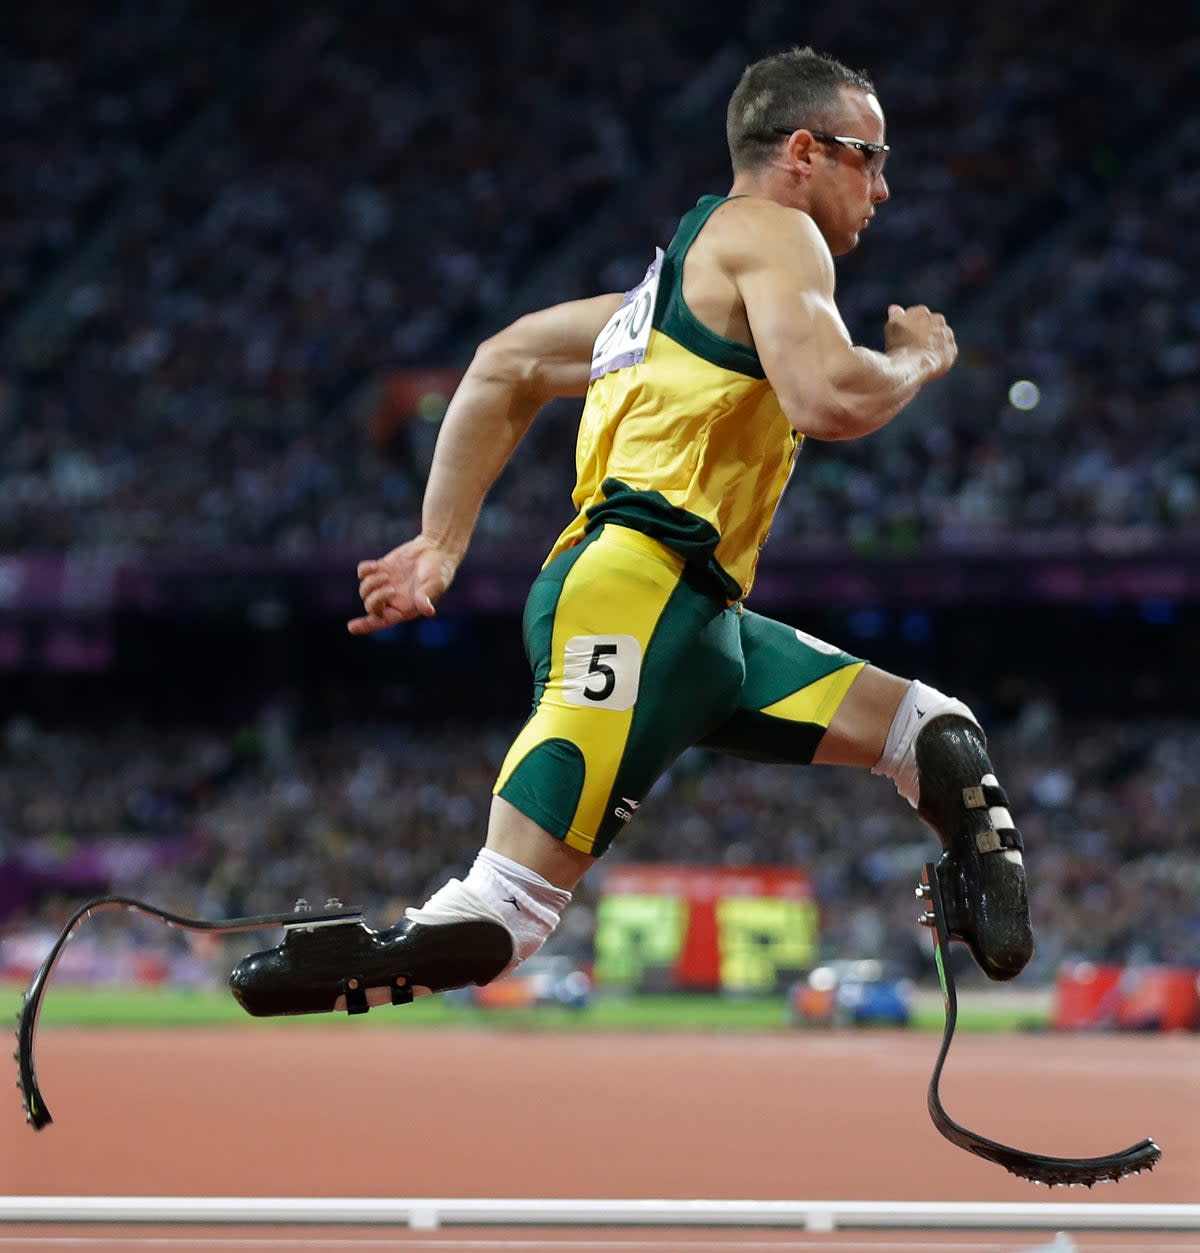 Pistorius was once the darling of the Paralympic movement for pushing for greater recognition and acceptance of disabled athletes (AP)